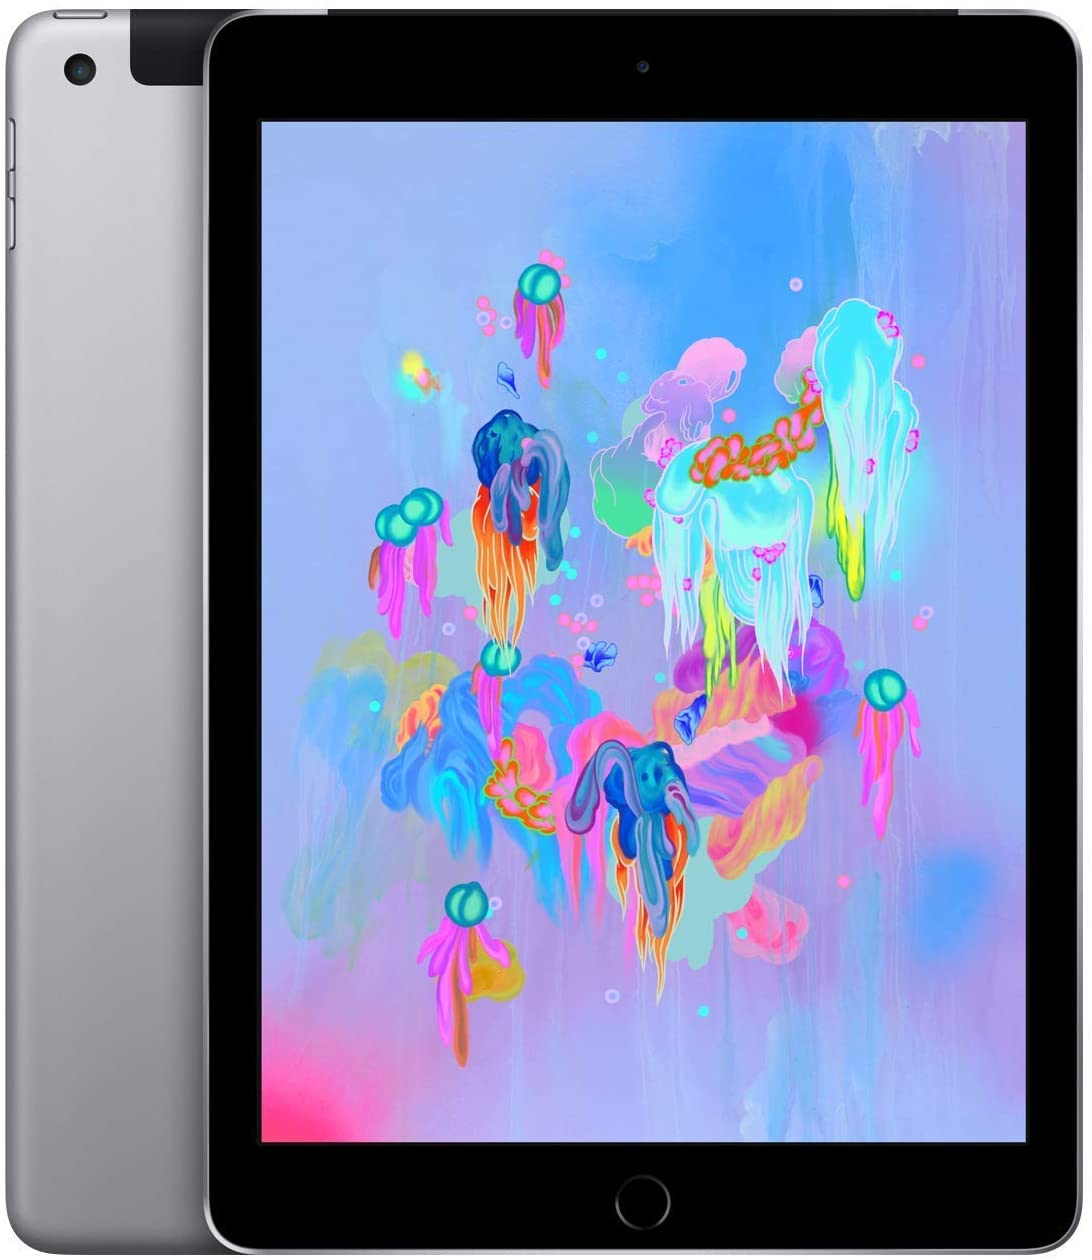 Apple iPad 6 32GB Wi-Fi + Cellular 3G/4G Space Gray (As New) New Battery, Glass Screen Protector & Shipping